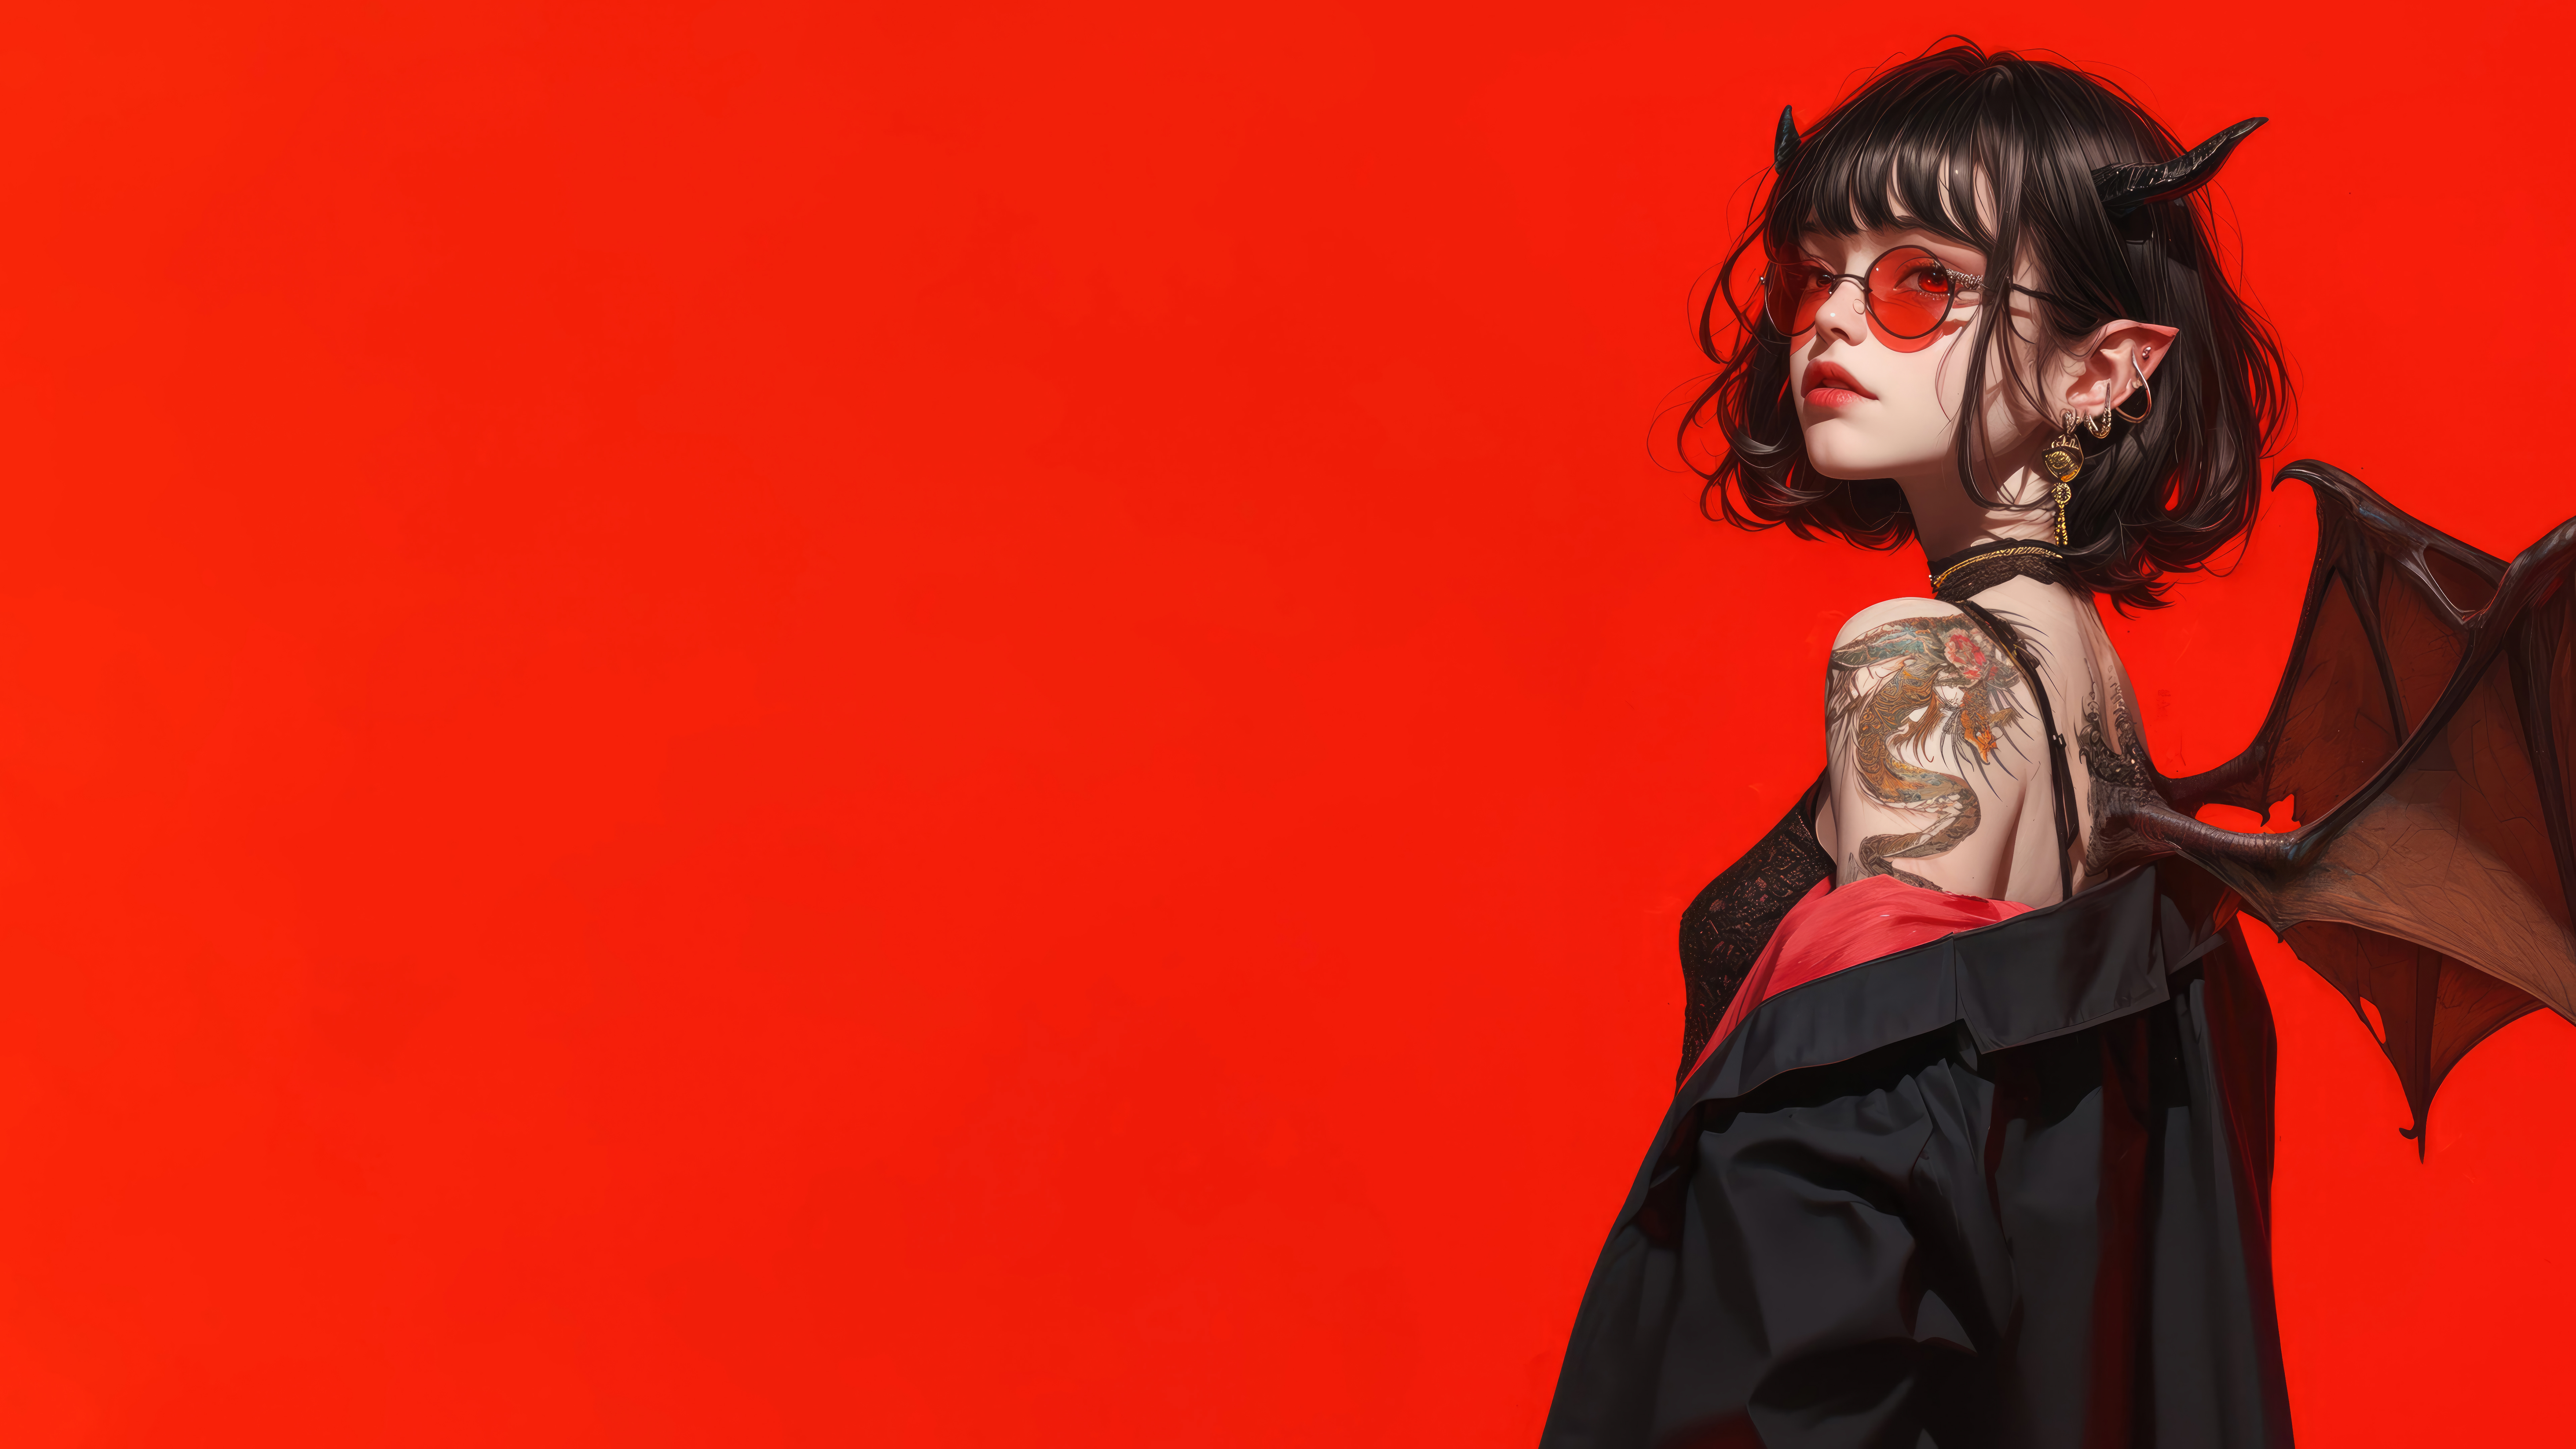 General 7680x4320 anime artwork digital art concept art anime girls red red background devil girl sunglasses women with shades earring devil horns wings looking at viewer black clothing AI art demon girls